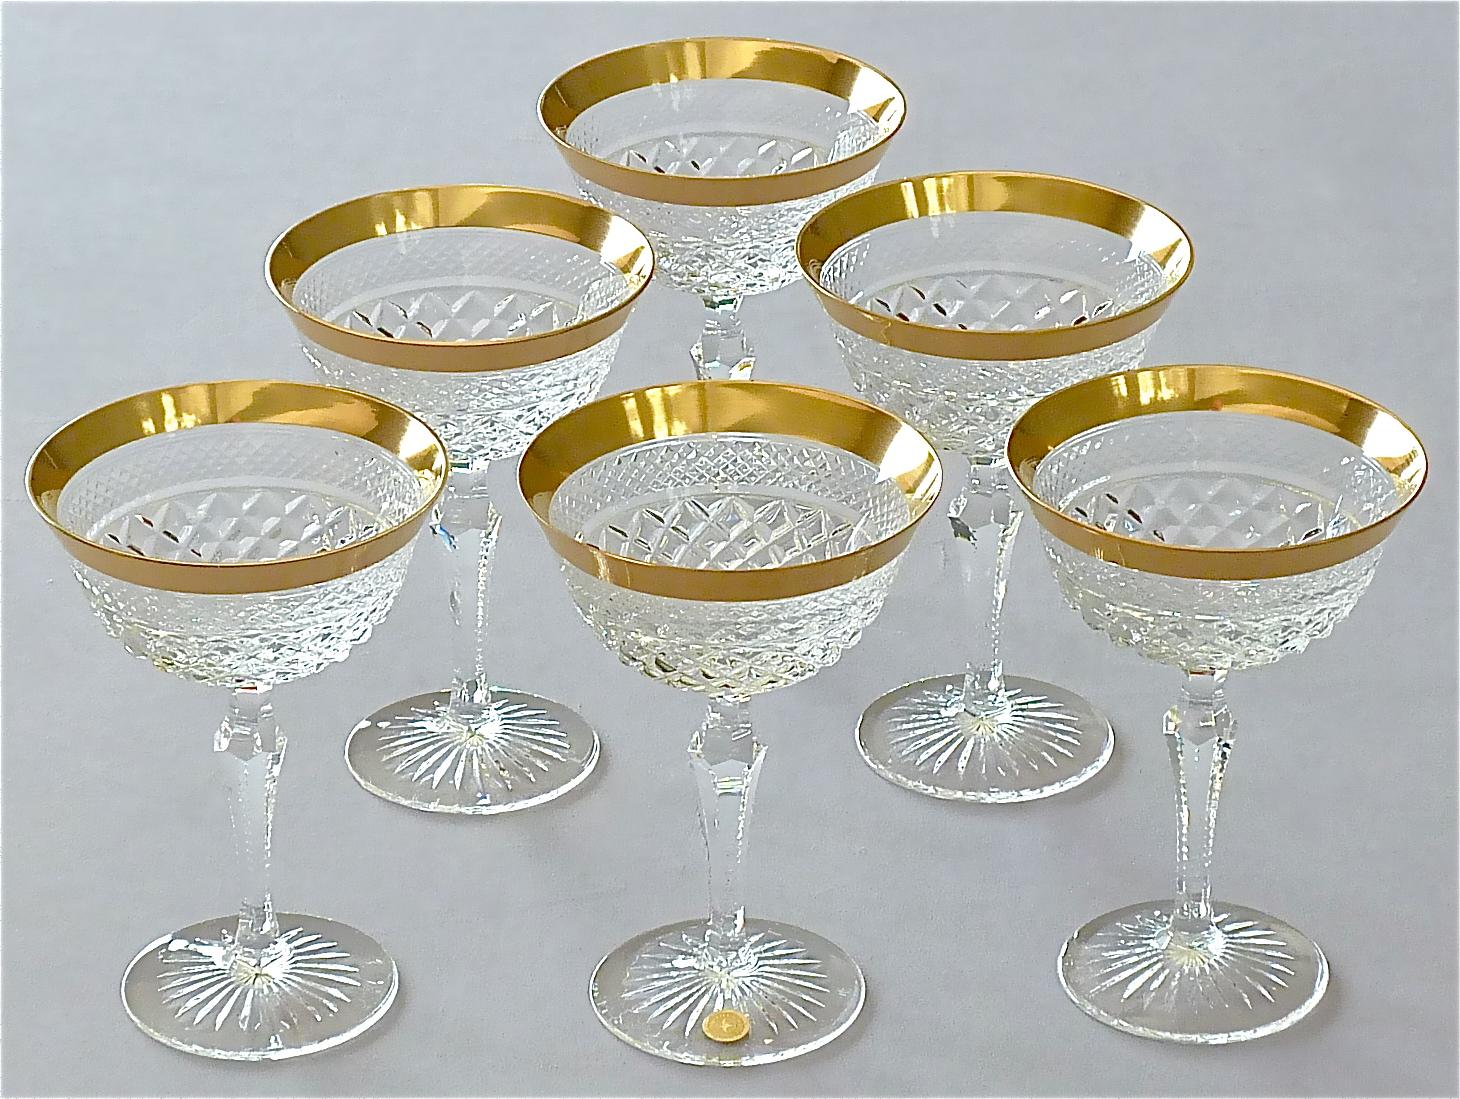 Gorgeous 20th century handcrafted faceted crystal glass set with 24 carat gold rim made by Josephinenhütte Moser circa 1960-1970 and very in the style of the exclusive french company Baccarat or Saint Louis thistle. This exquisite set of 6 champagne